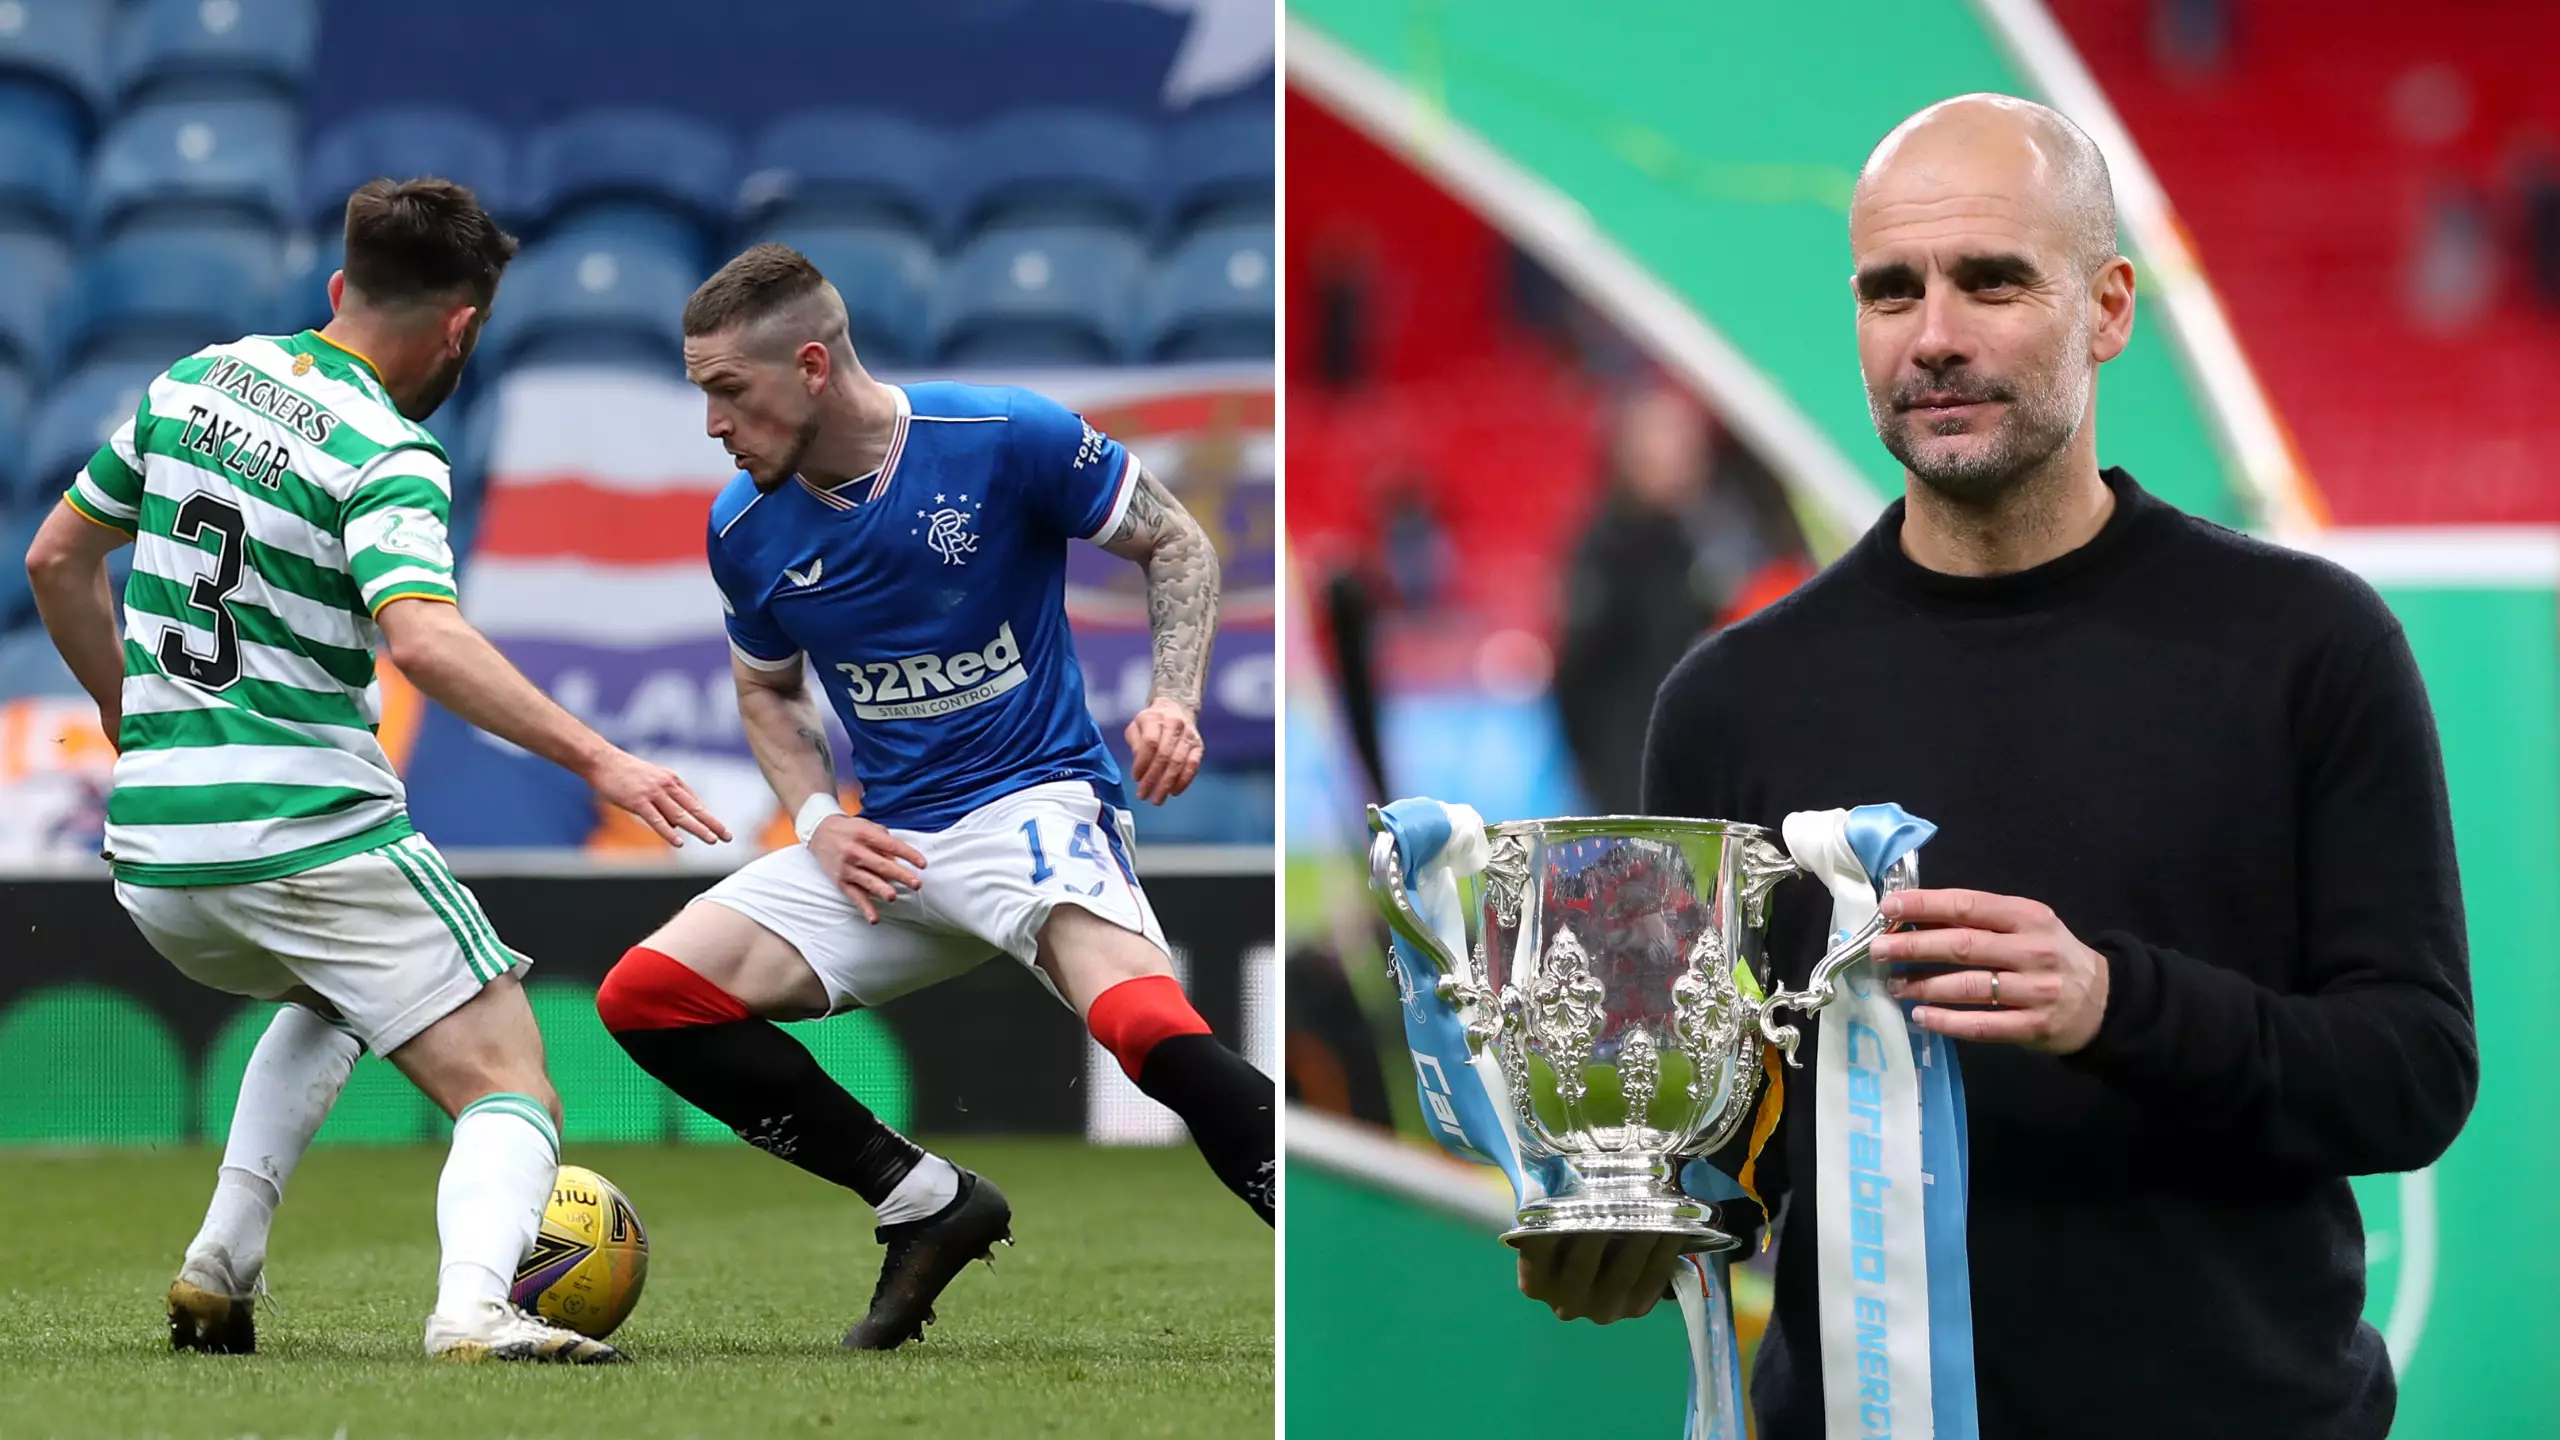 'Rangers And Celtic Should Be Invited To Take Part In The Carabao Cup'